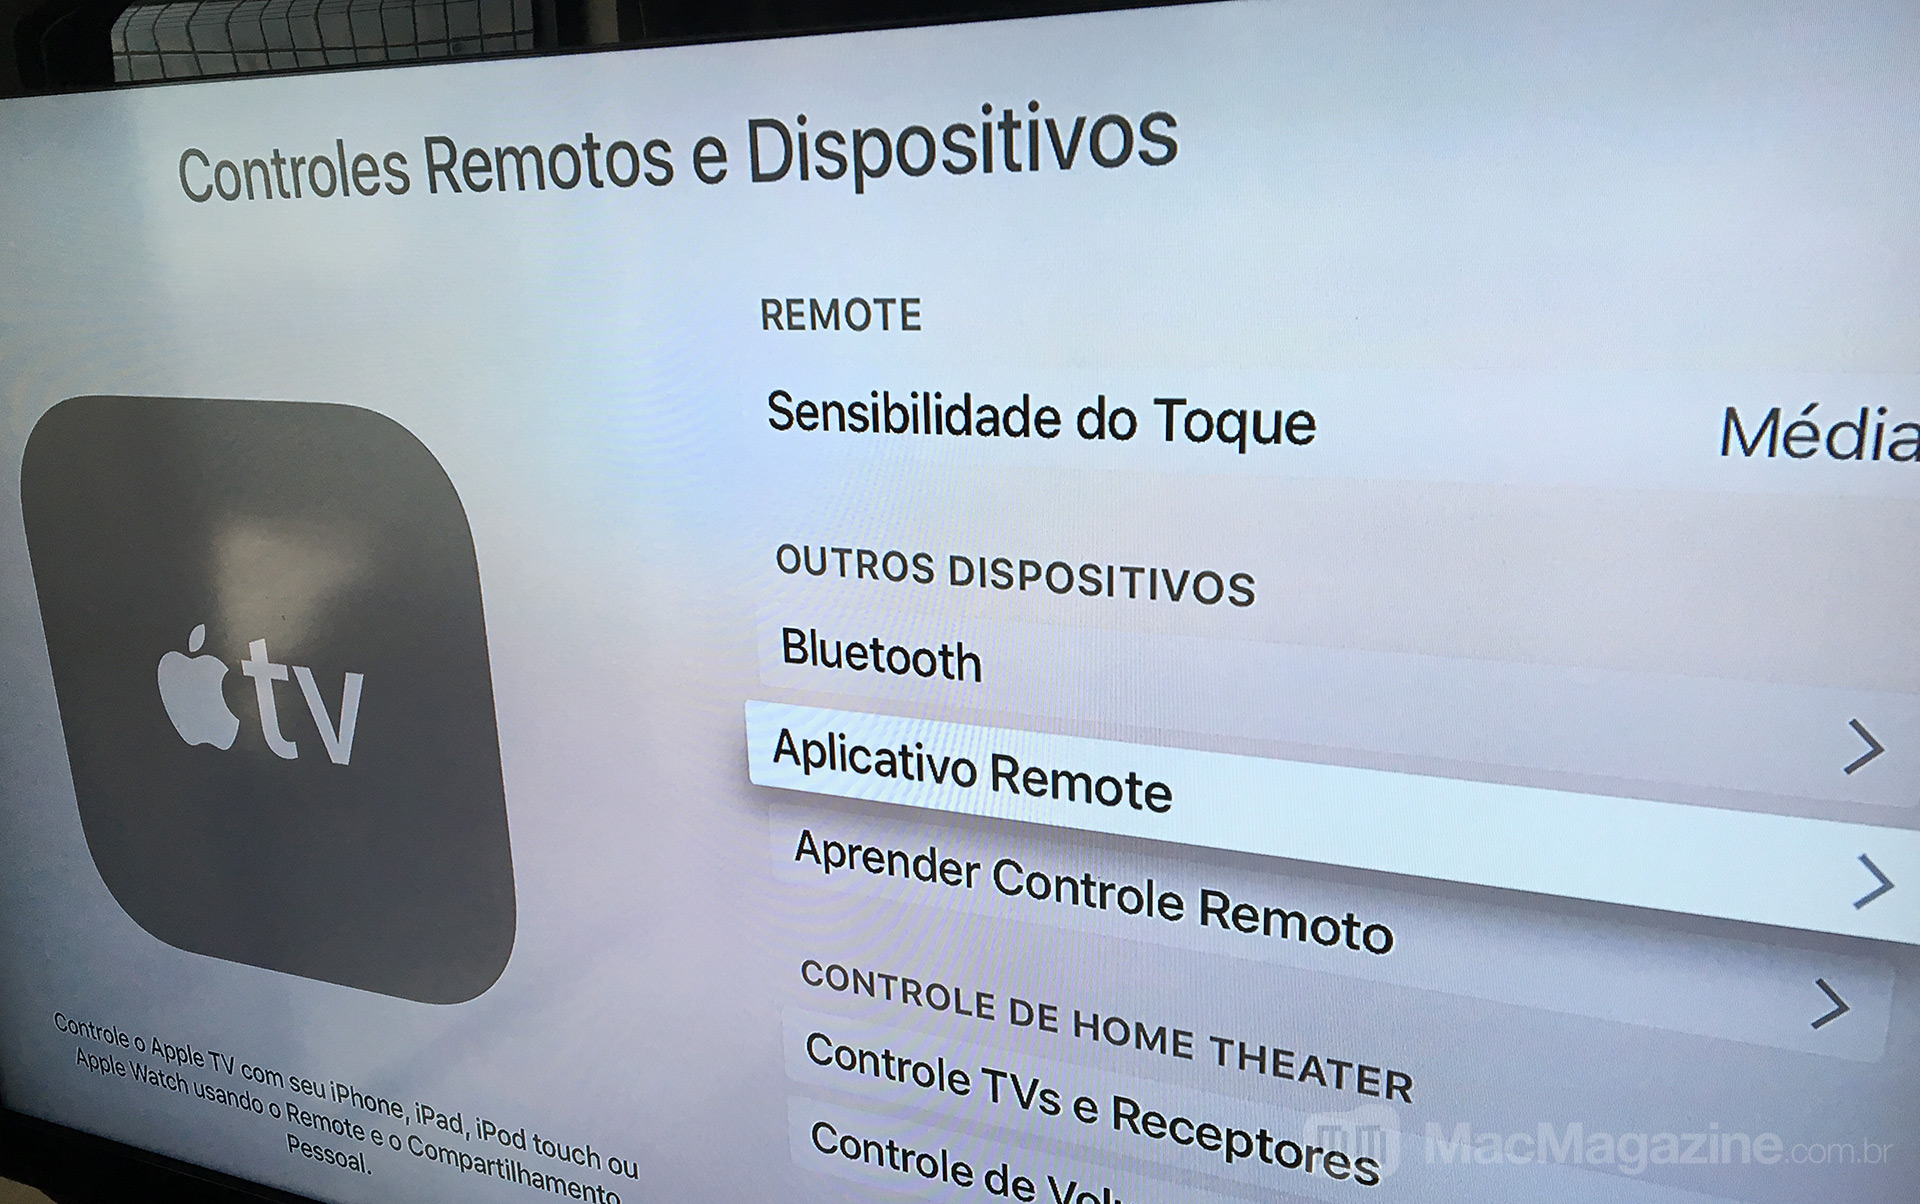 Controlling Apple TV with Apple Watch